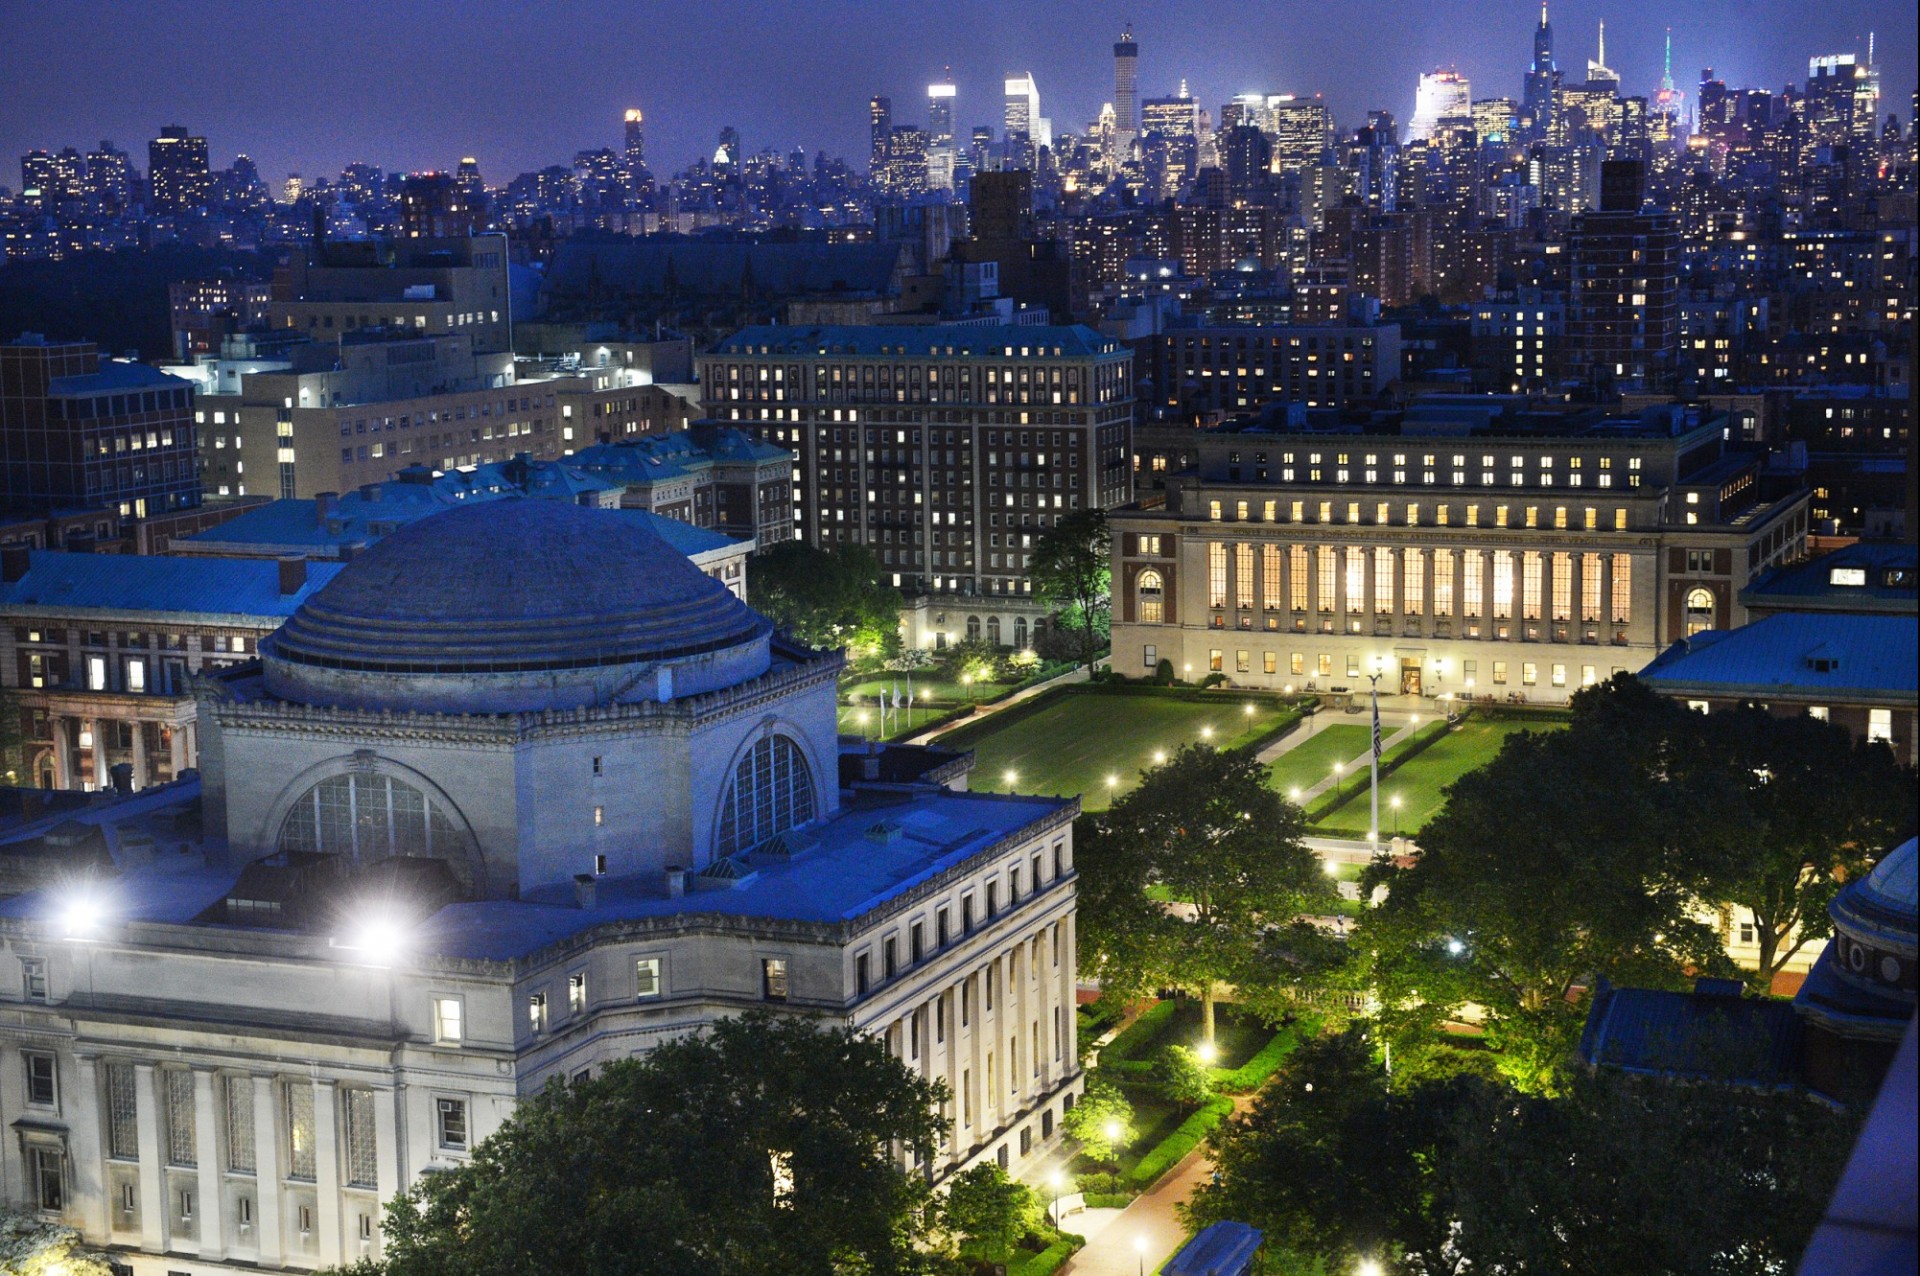 An aerial view of Columbia University's Morningside Campus at night.